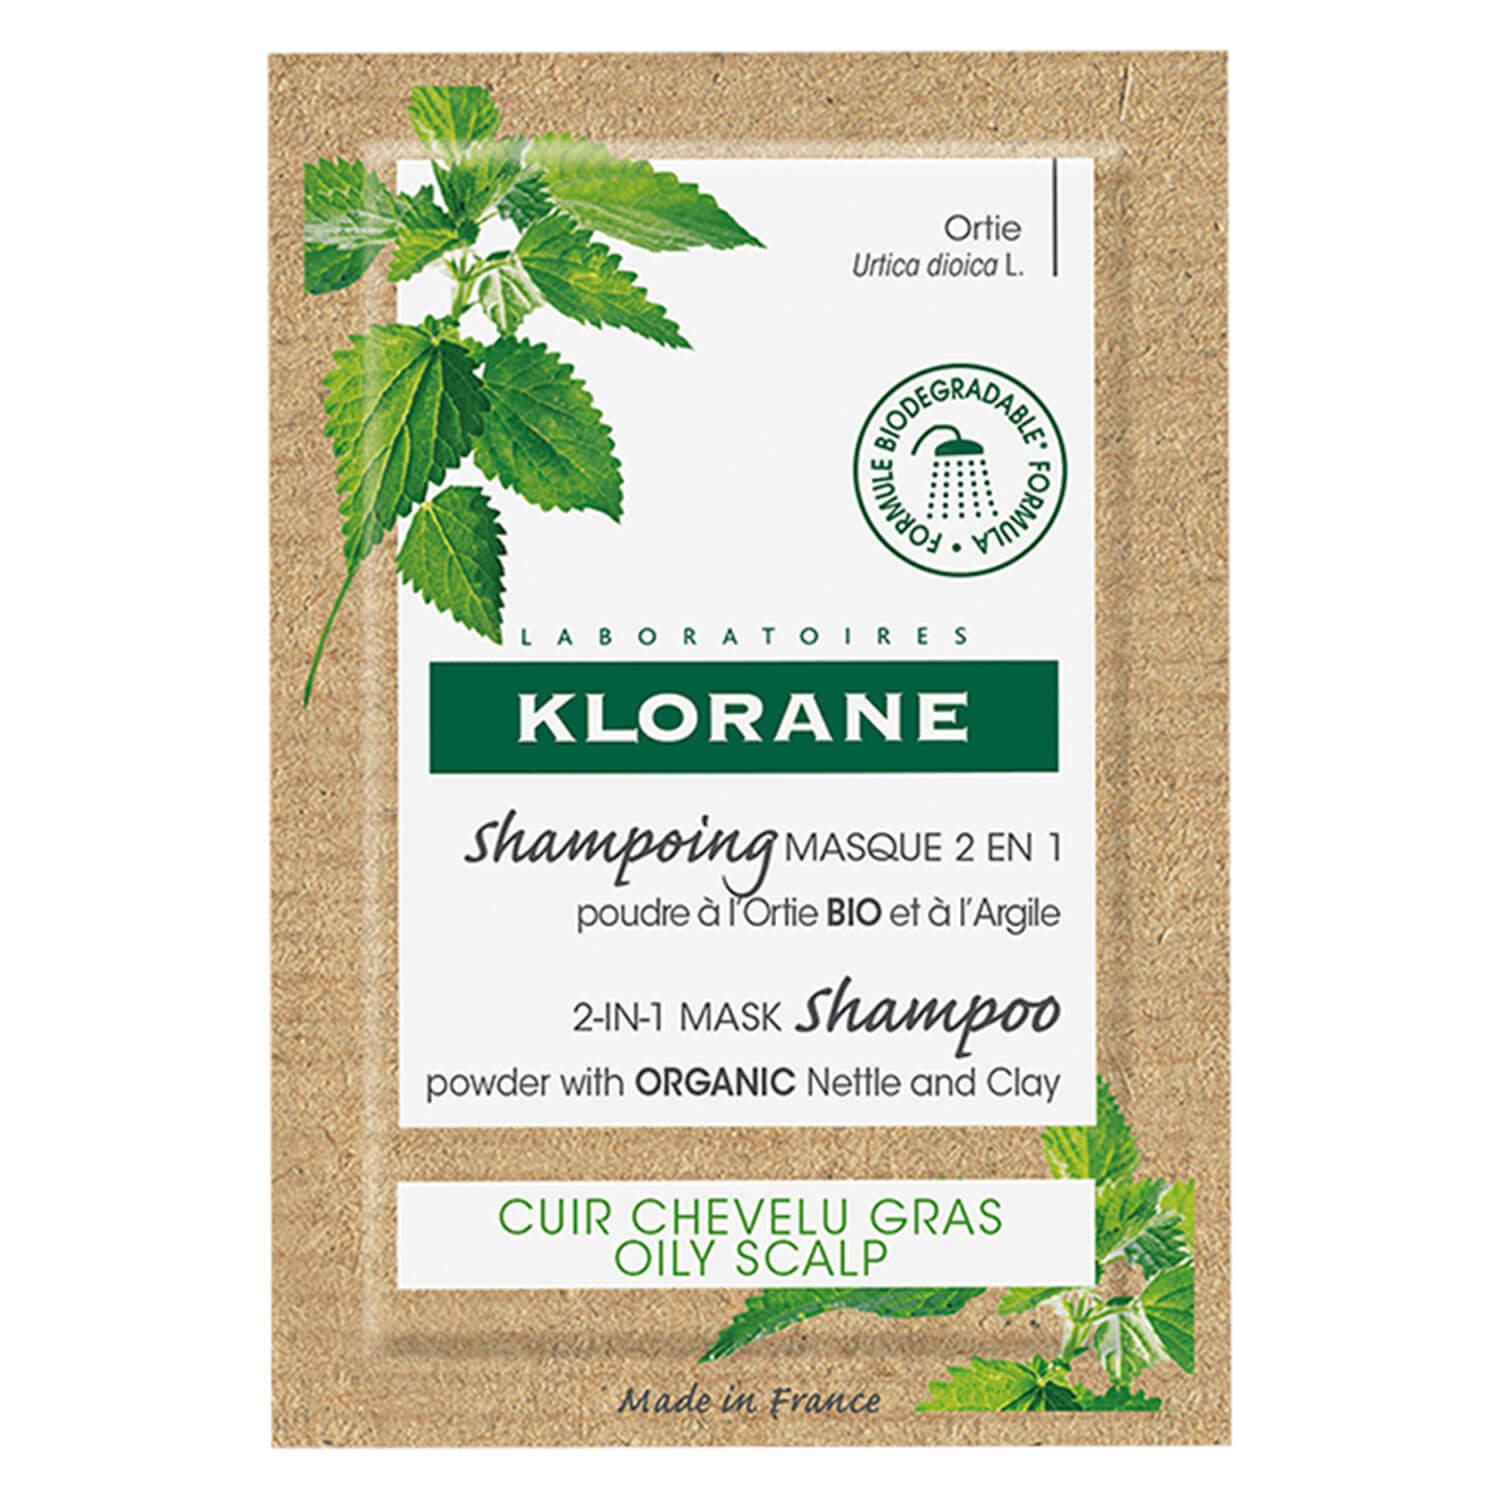 KLORANE Hair - 2-in-1 Mask Shampoo Powder with Organic Nettle and Clay